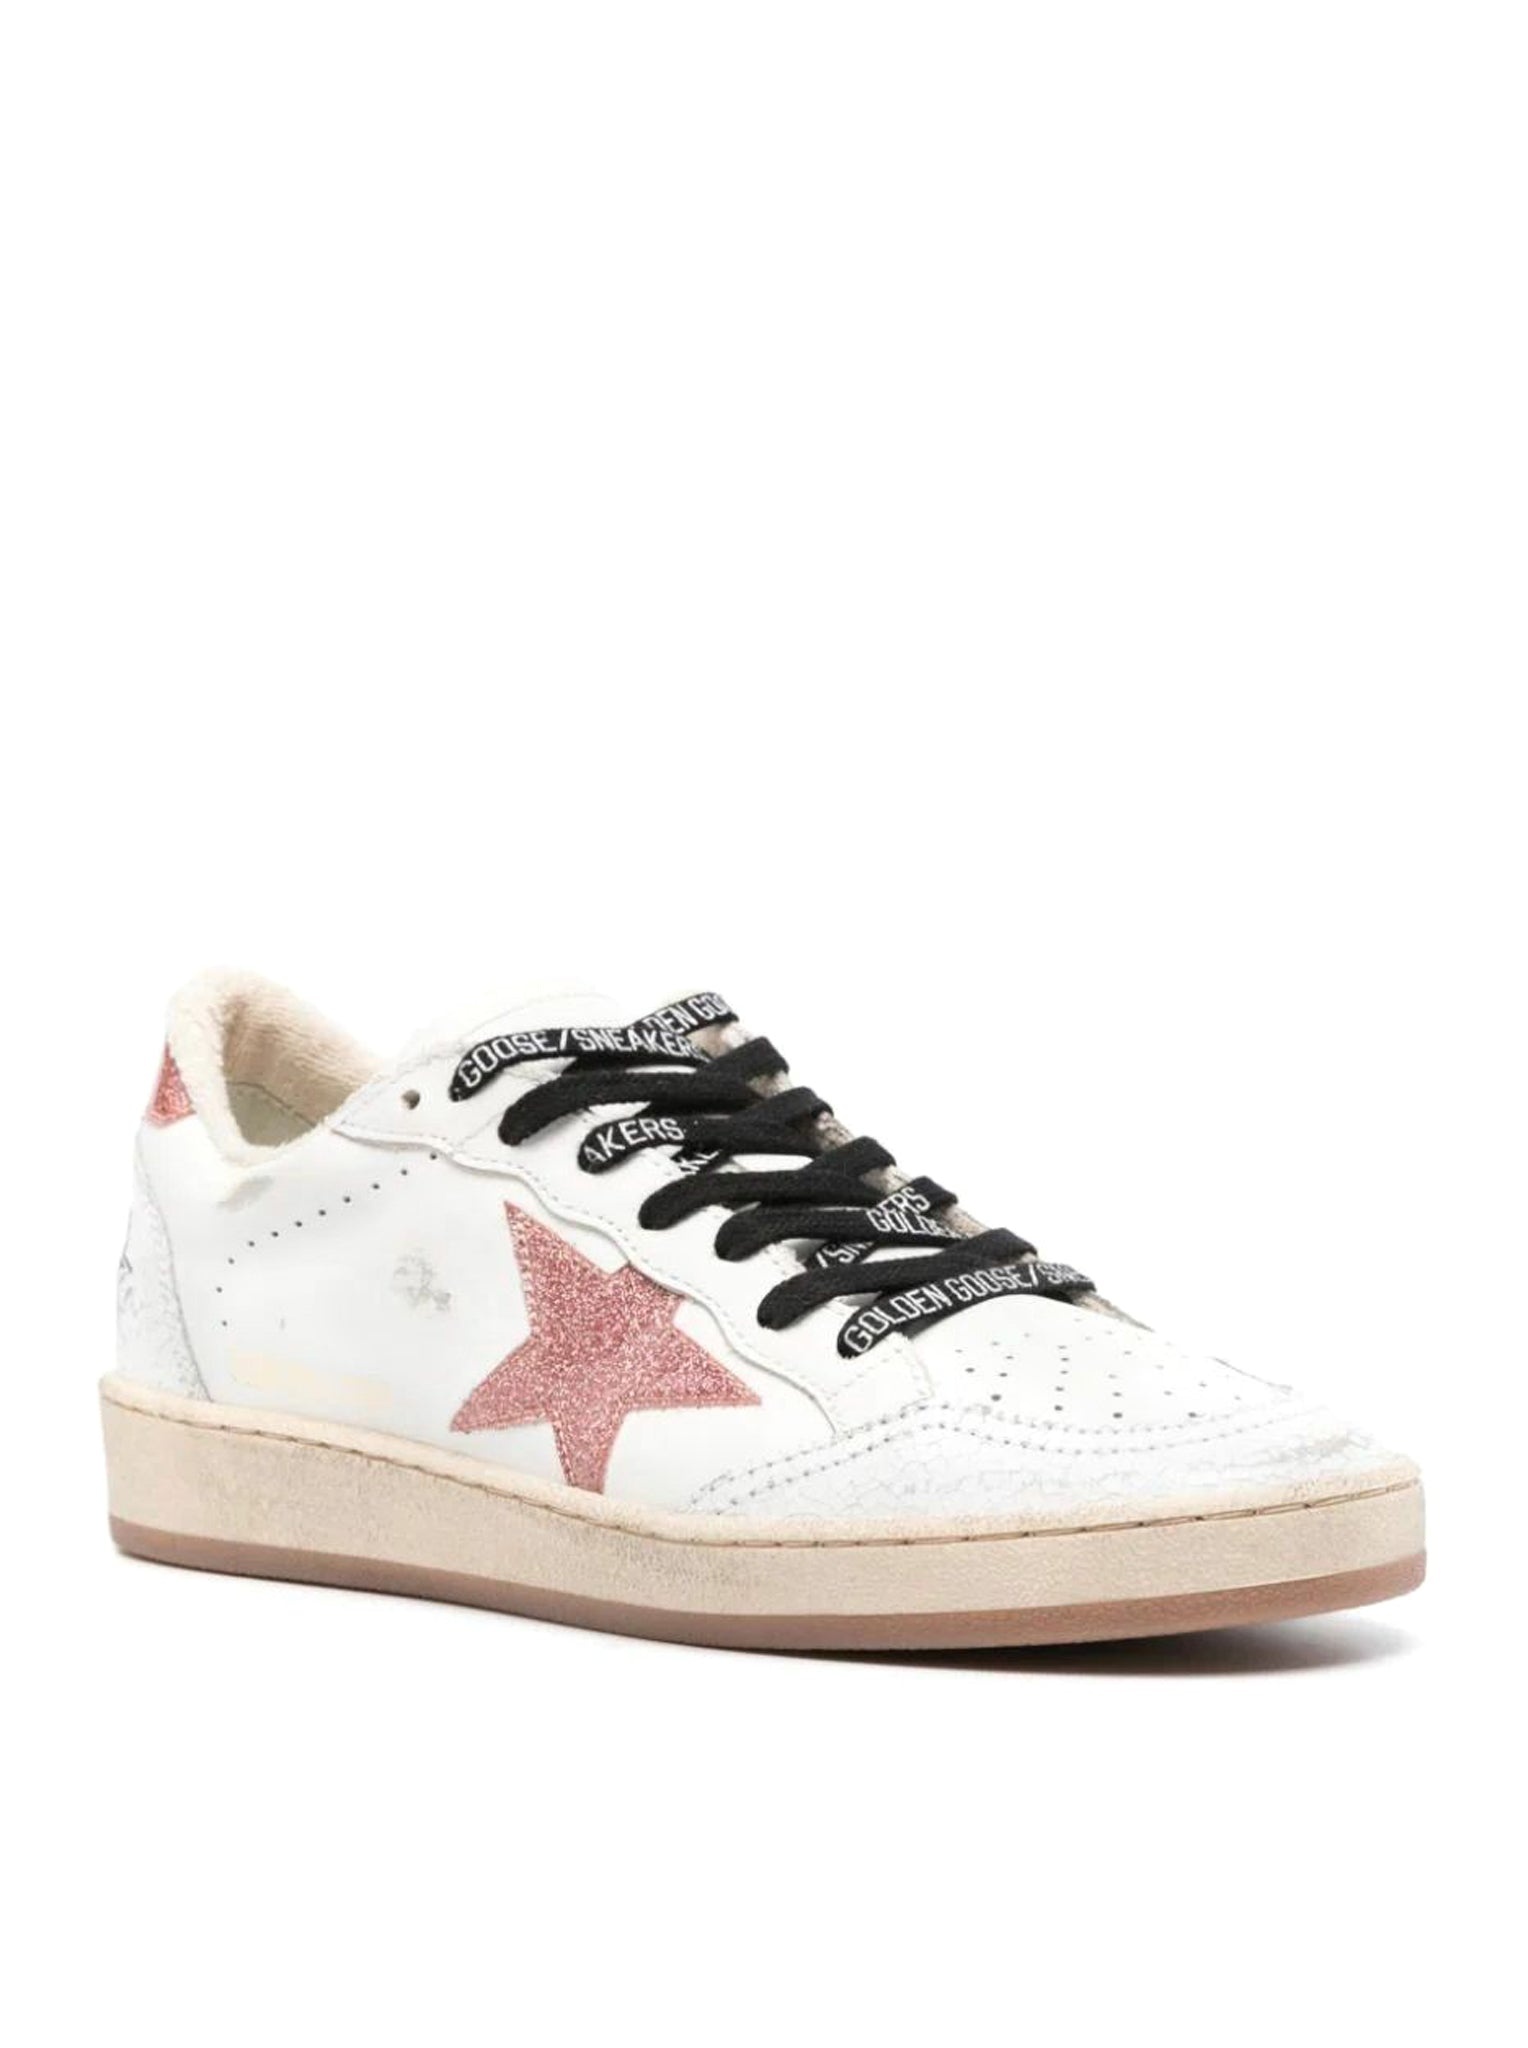 BALL-STAR LEATHER SNEAKERS - 2